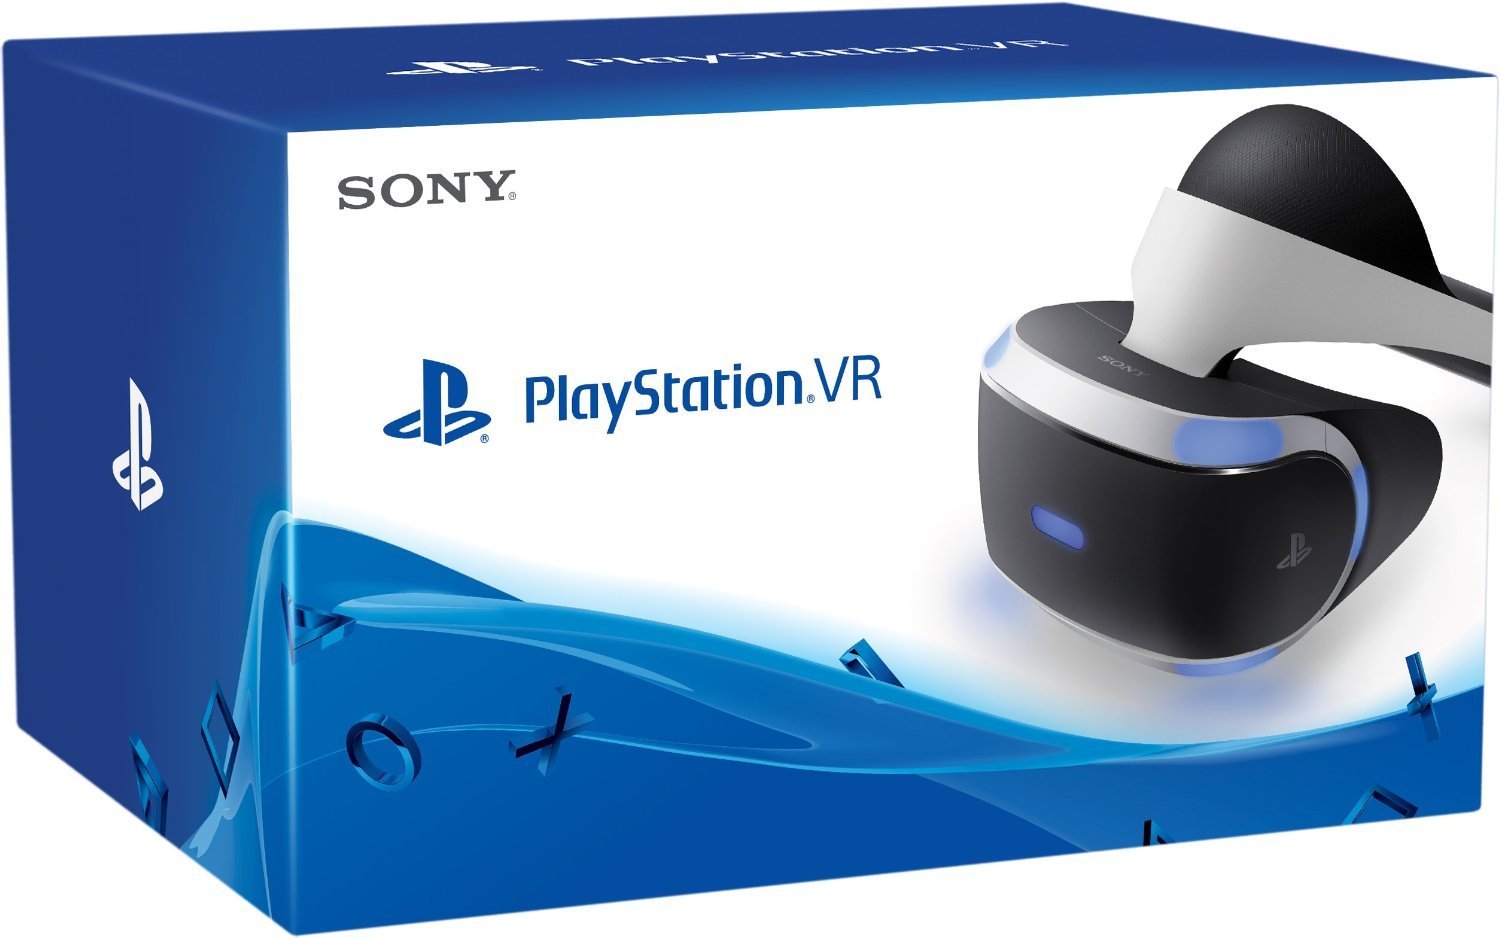 Amazon Prime Day Angebote: Playstation VR, 65 Zoll UHD-Fernseher